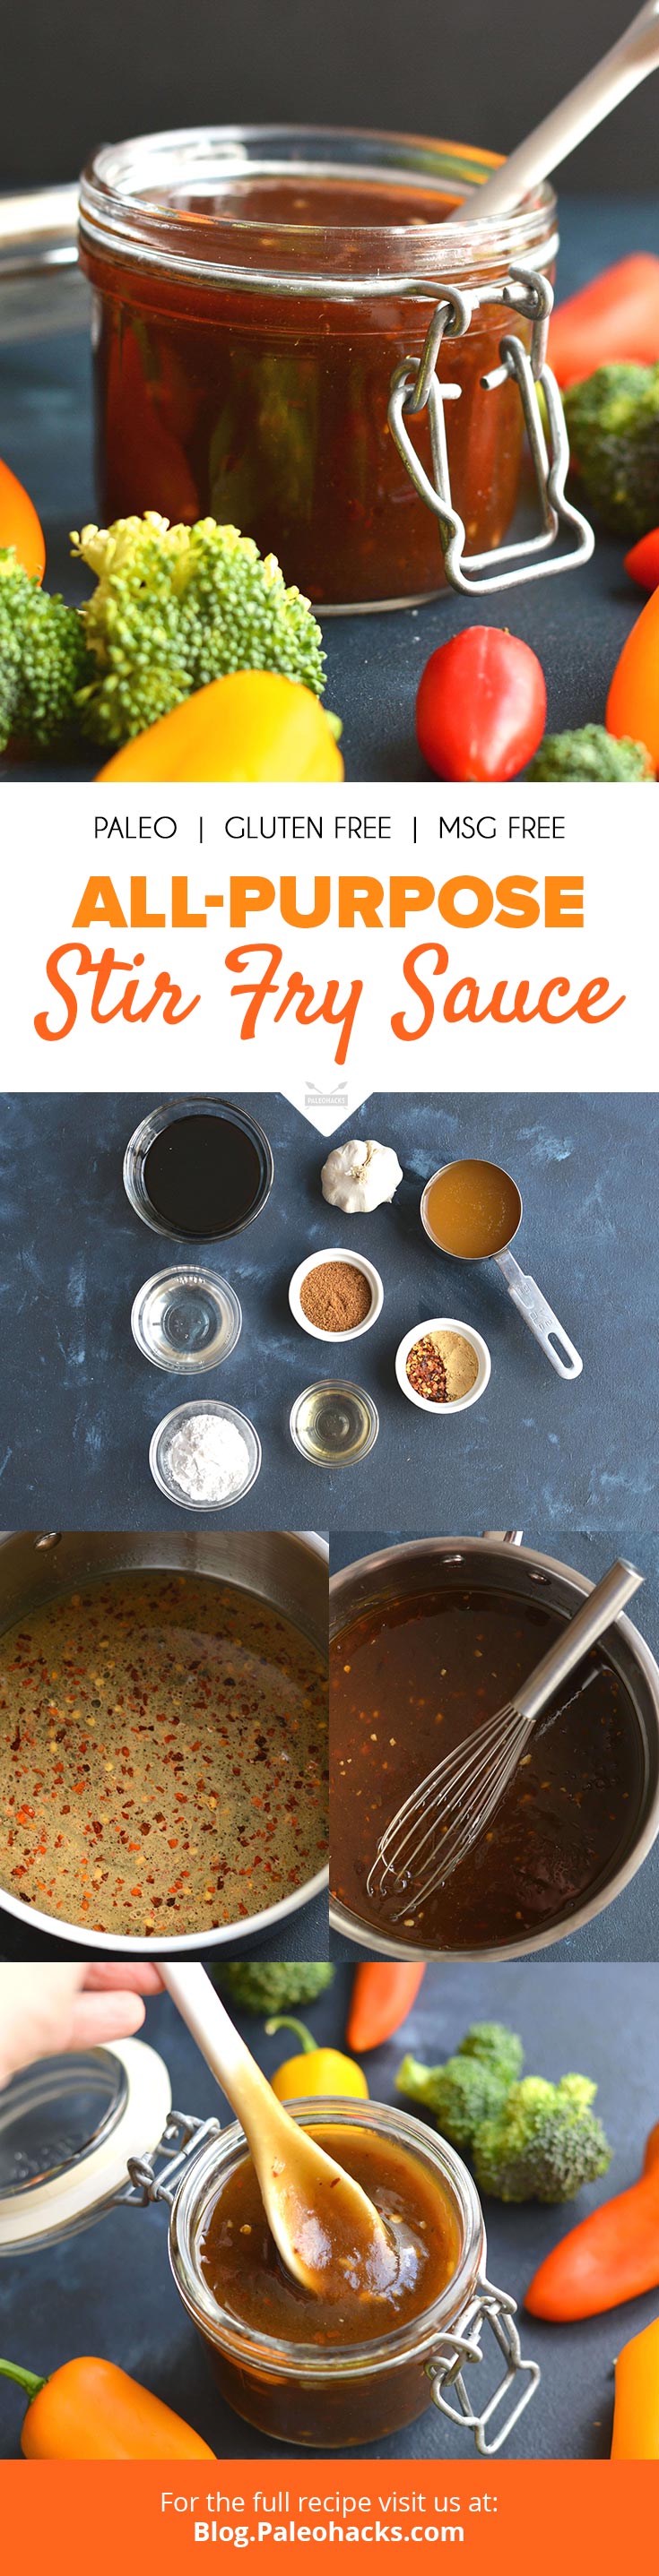 This stir fry sauce is made from simple, healthy pantry items for a meal even more delicious than your favorite take-out spot!